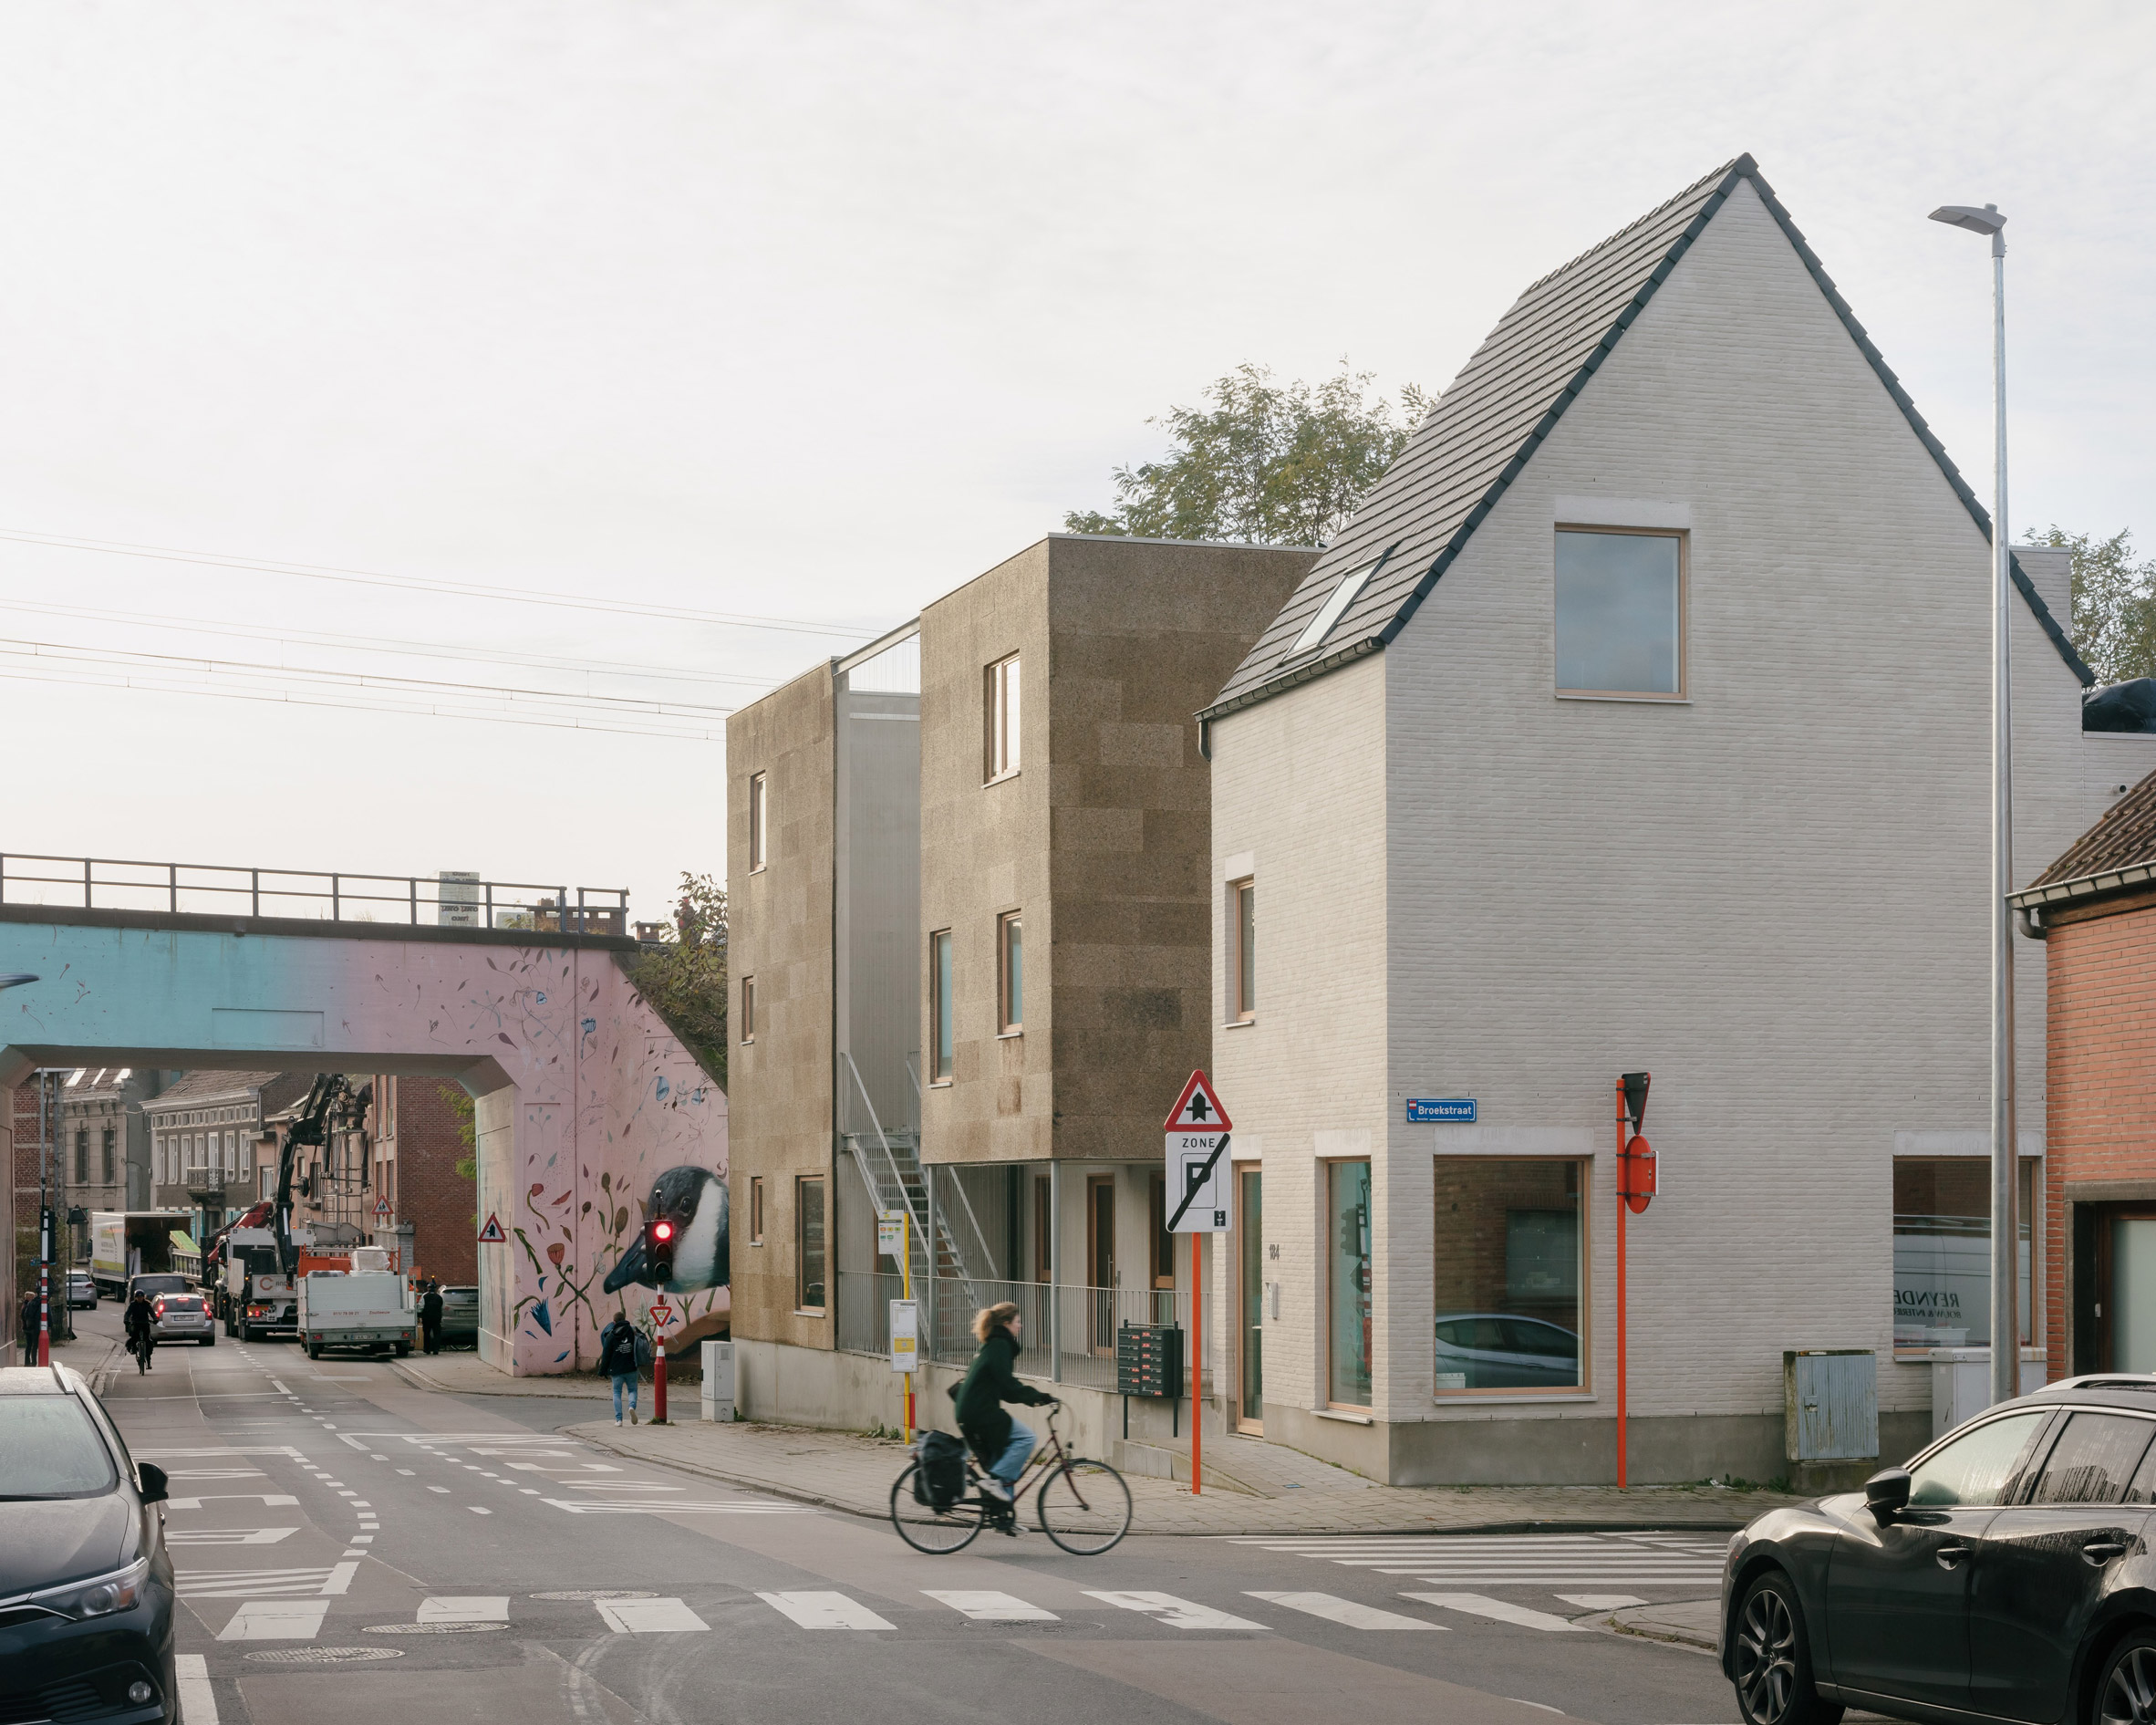 Street view of the De Sijs co-housing project in Leuven